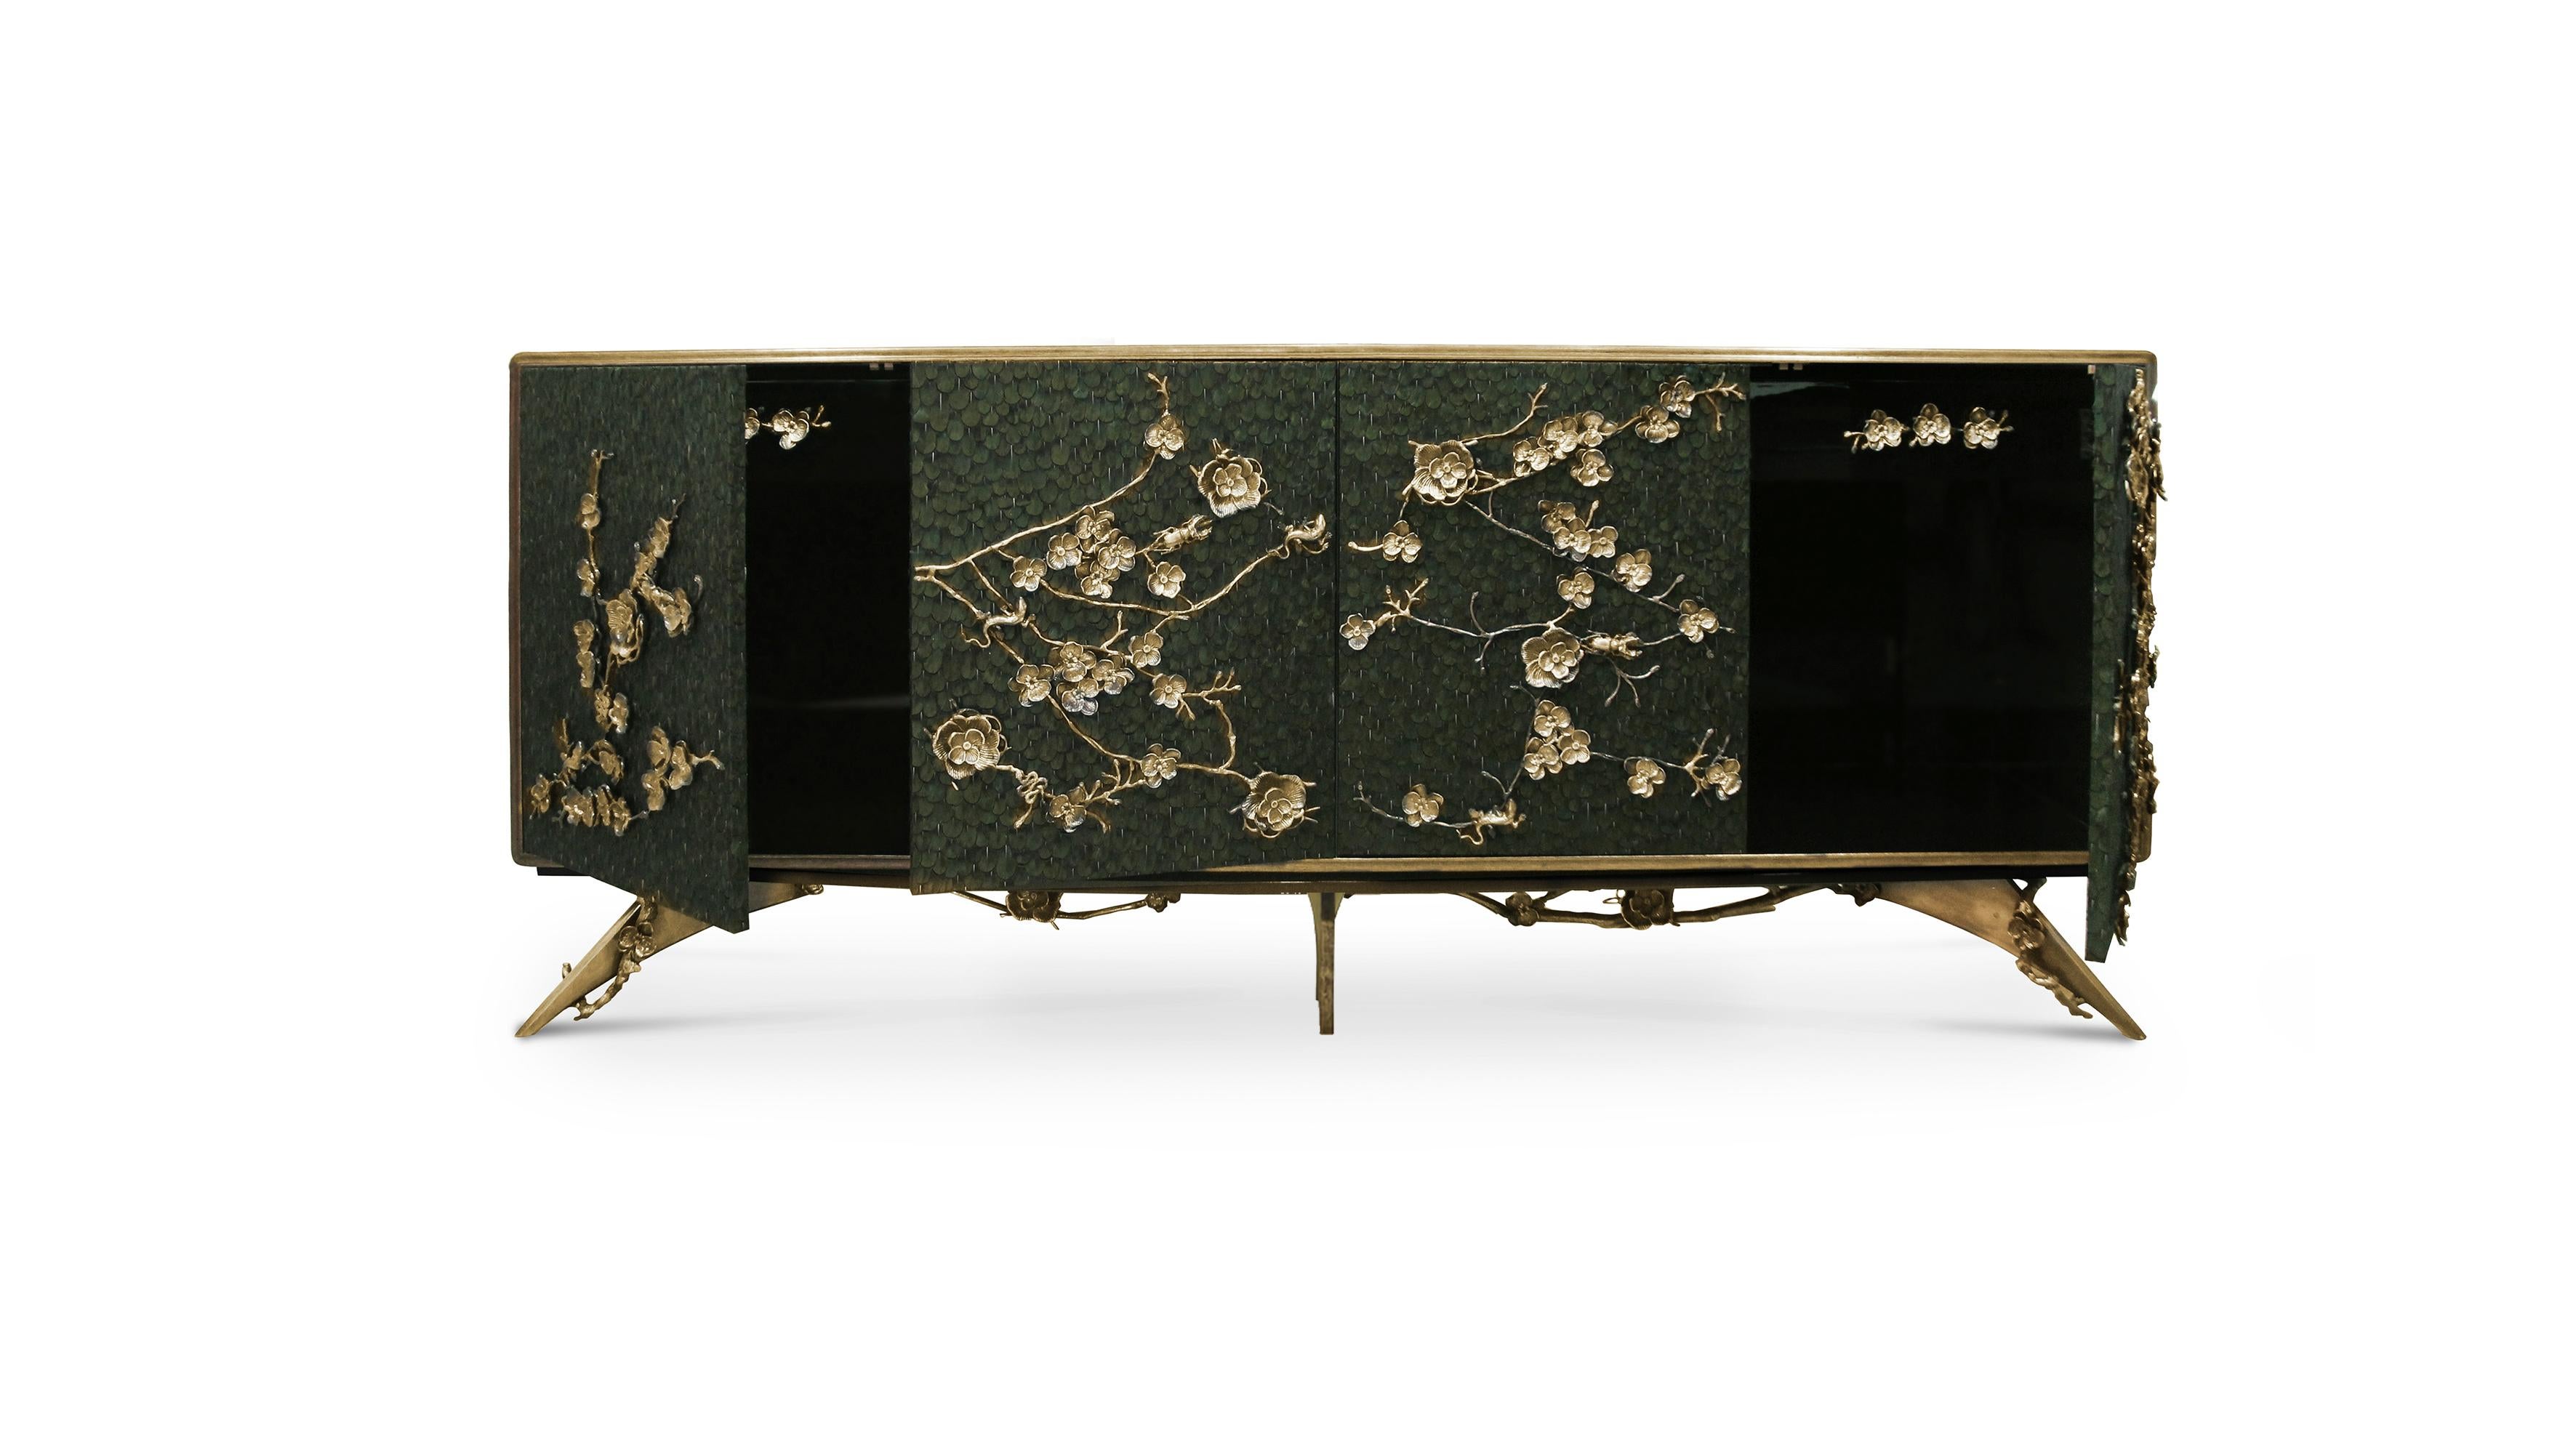 Portuguese Contemporary Spellbound II Cabinet by Koket For Sale